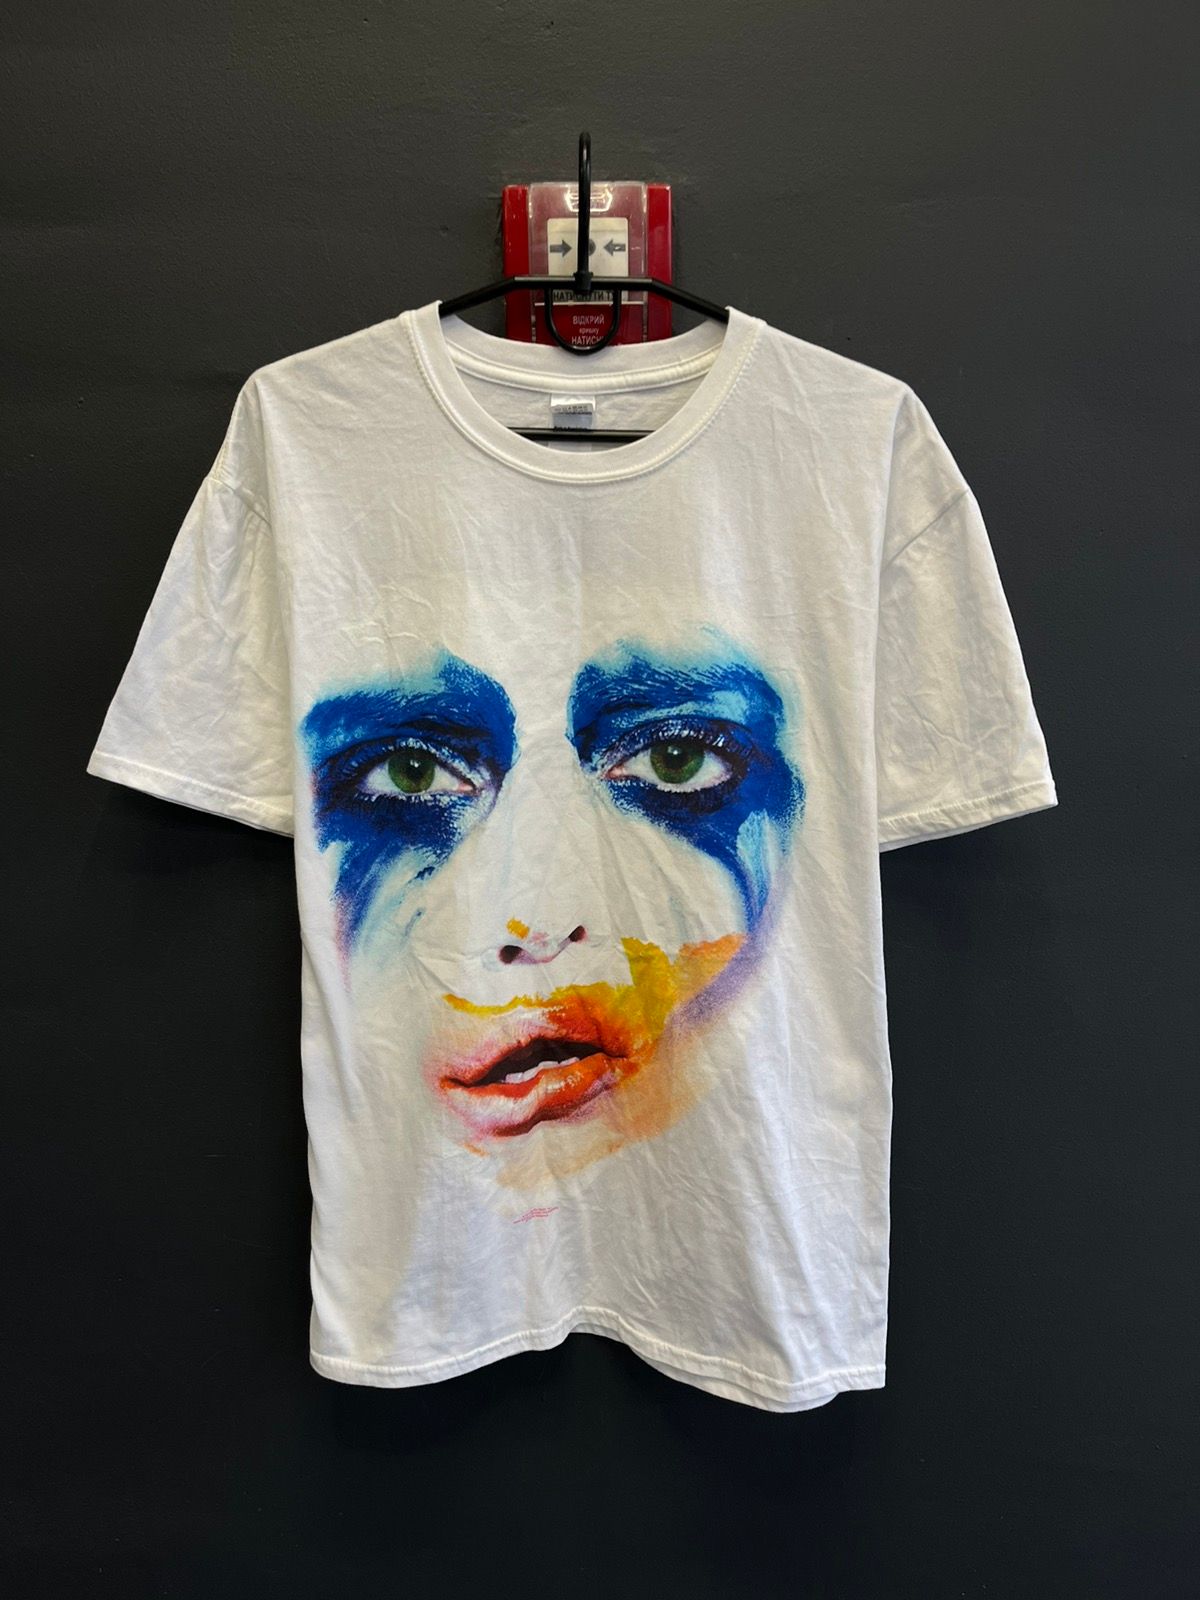 Pre-owned Band Tees X Rap Tees Vintage 2014 Lady Gaga Art Rave Art Pop Ball Tee (spice Girl In White